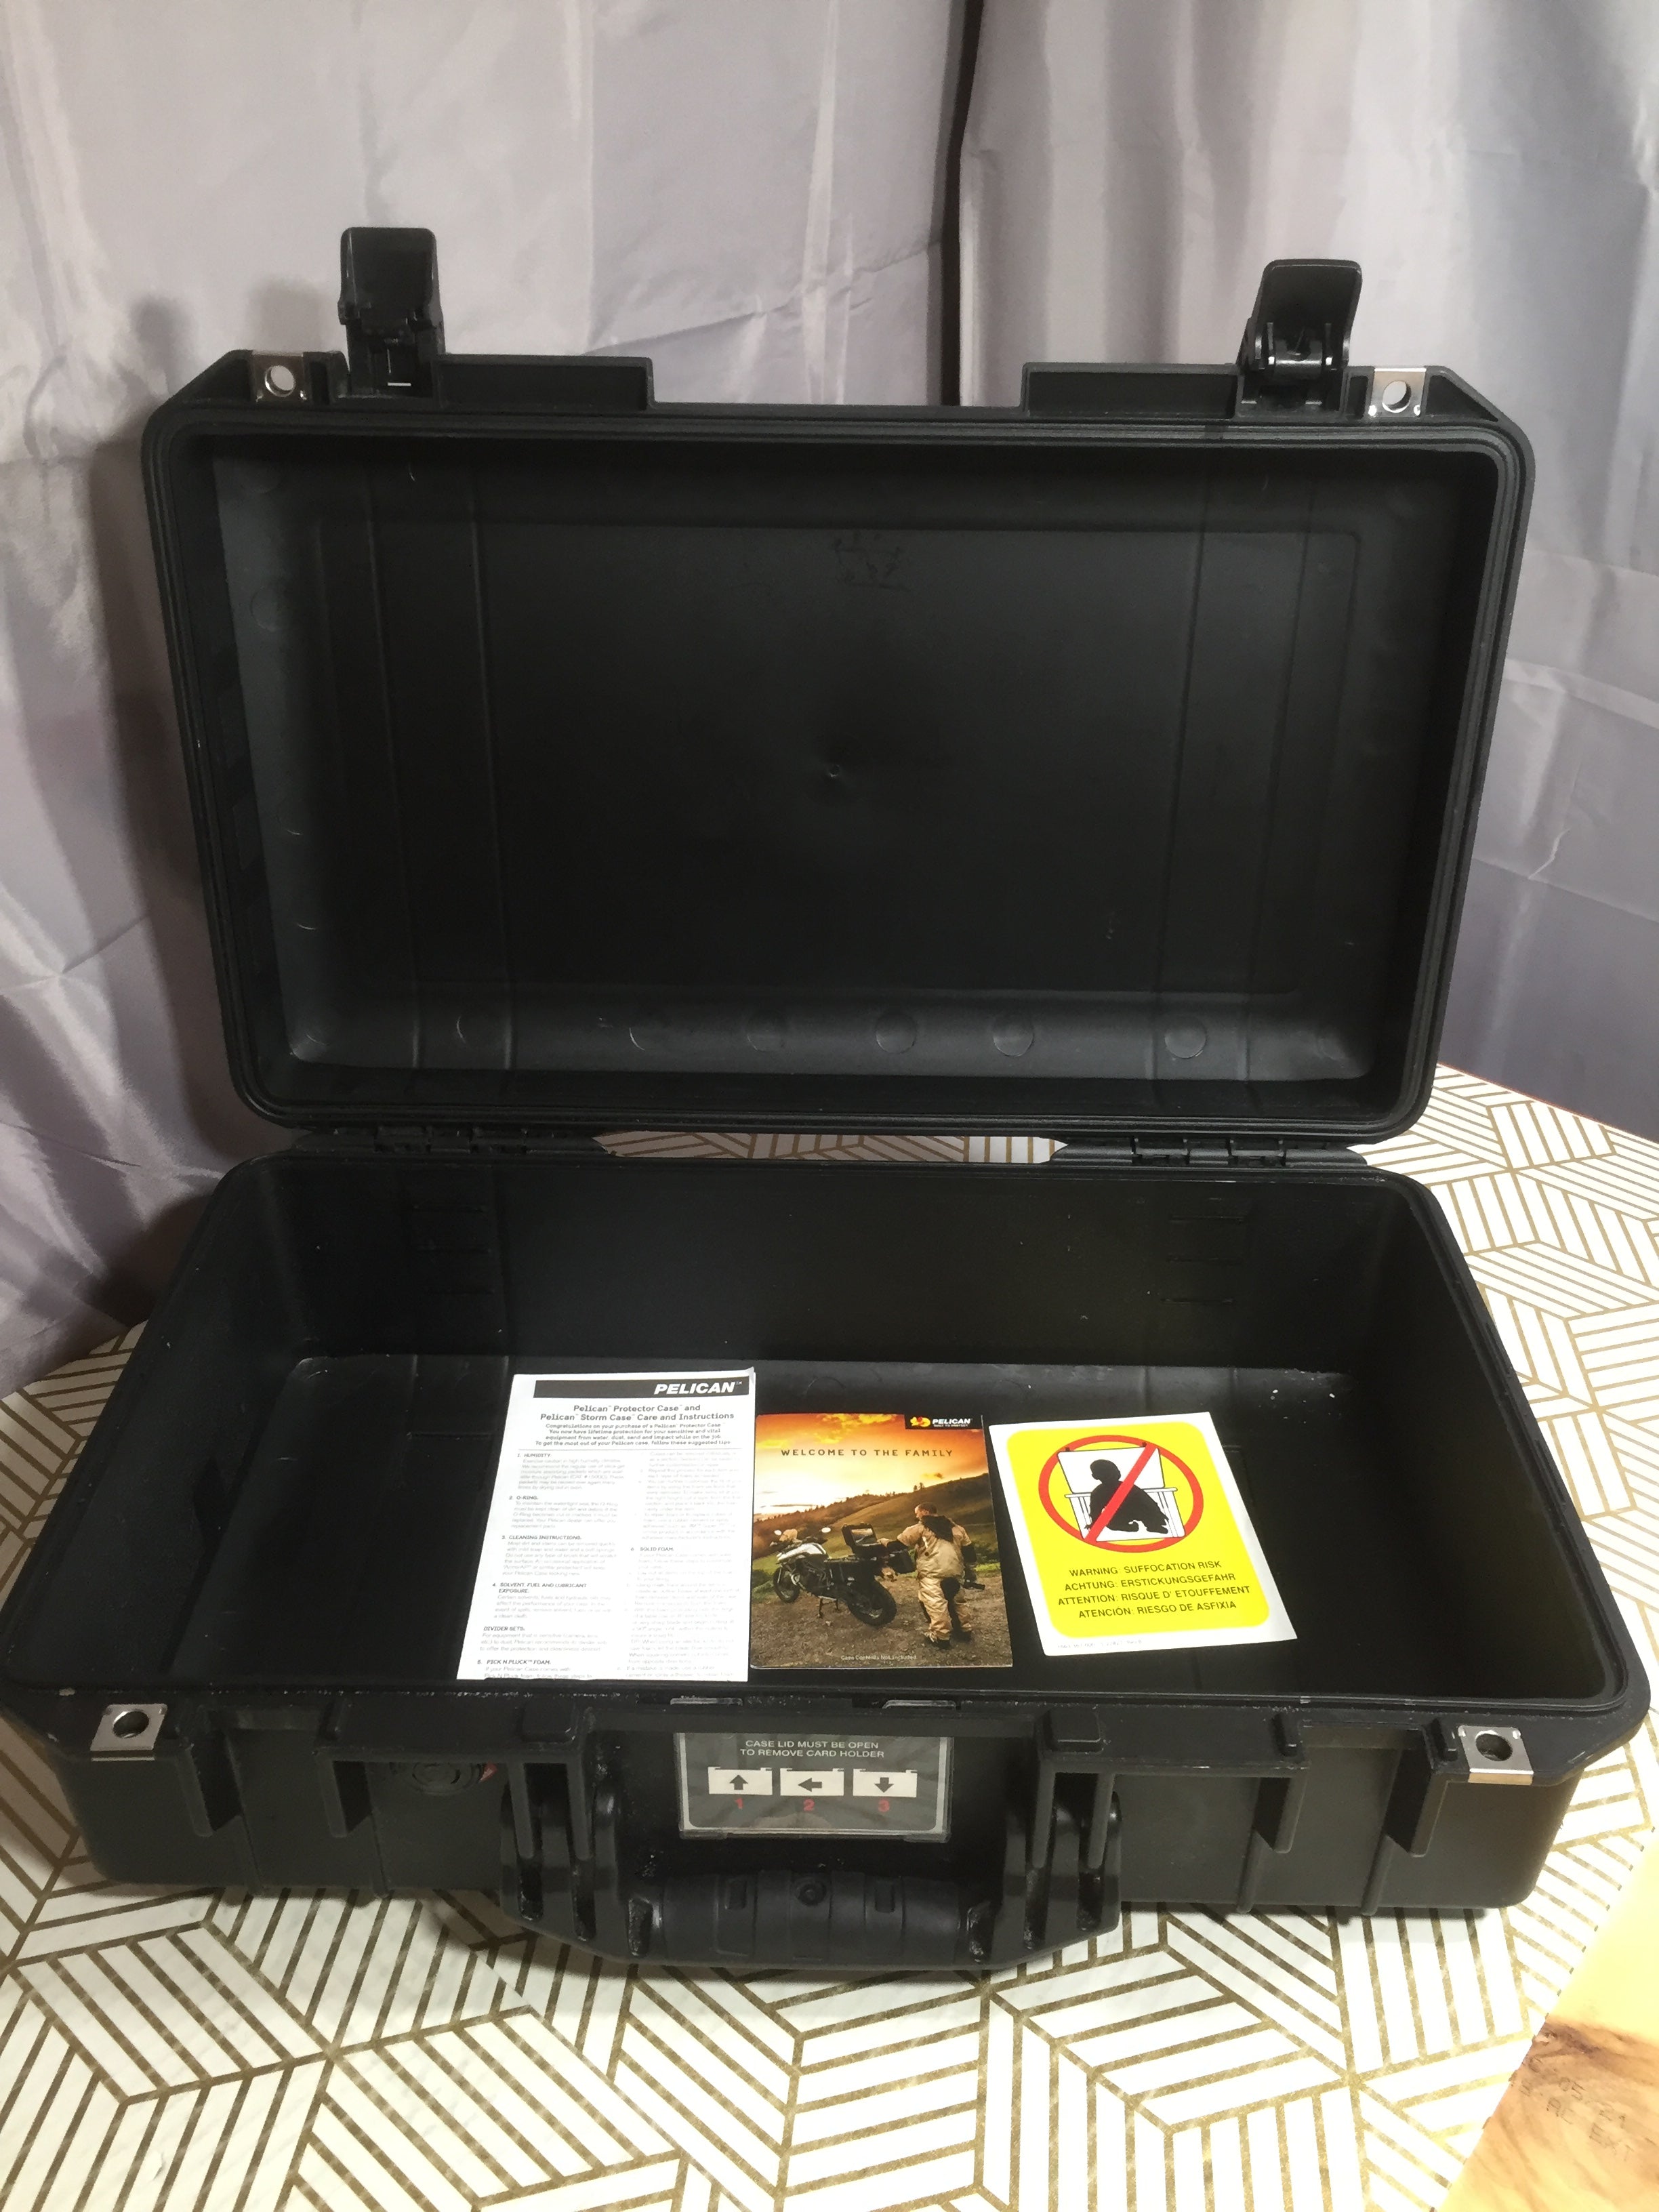 Pelican Air 1525 Travel Case - Carry On Luggage (Black) | USED *WRONG BOX* (8095276499182)